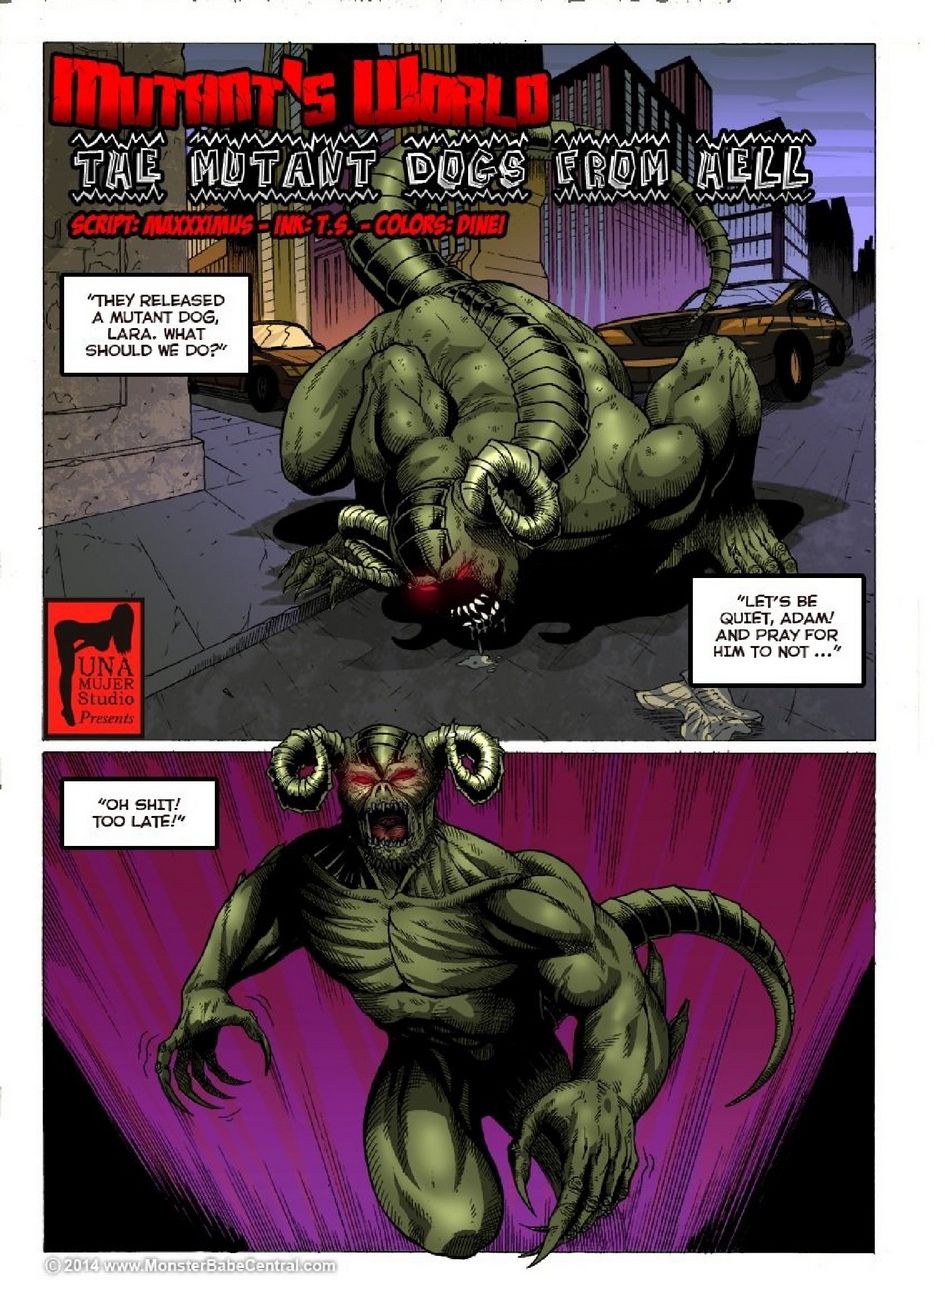 Mutant's World 4 - The Mutant Dogs From Hell page 2